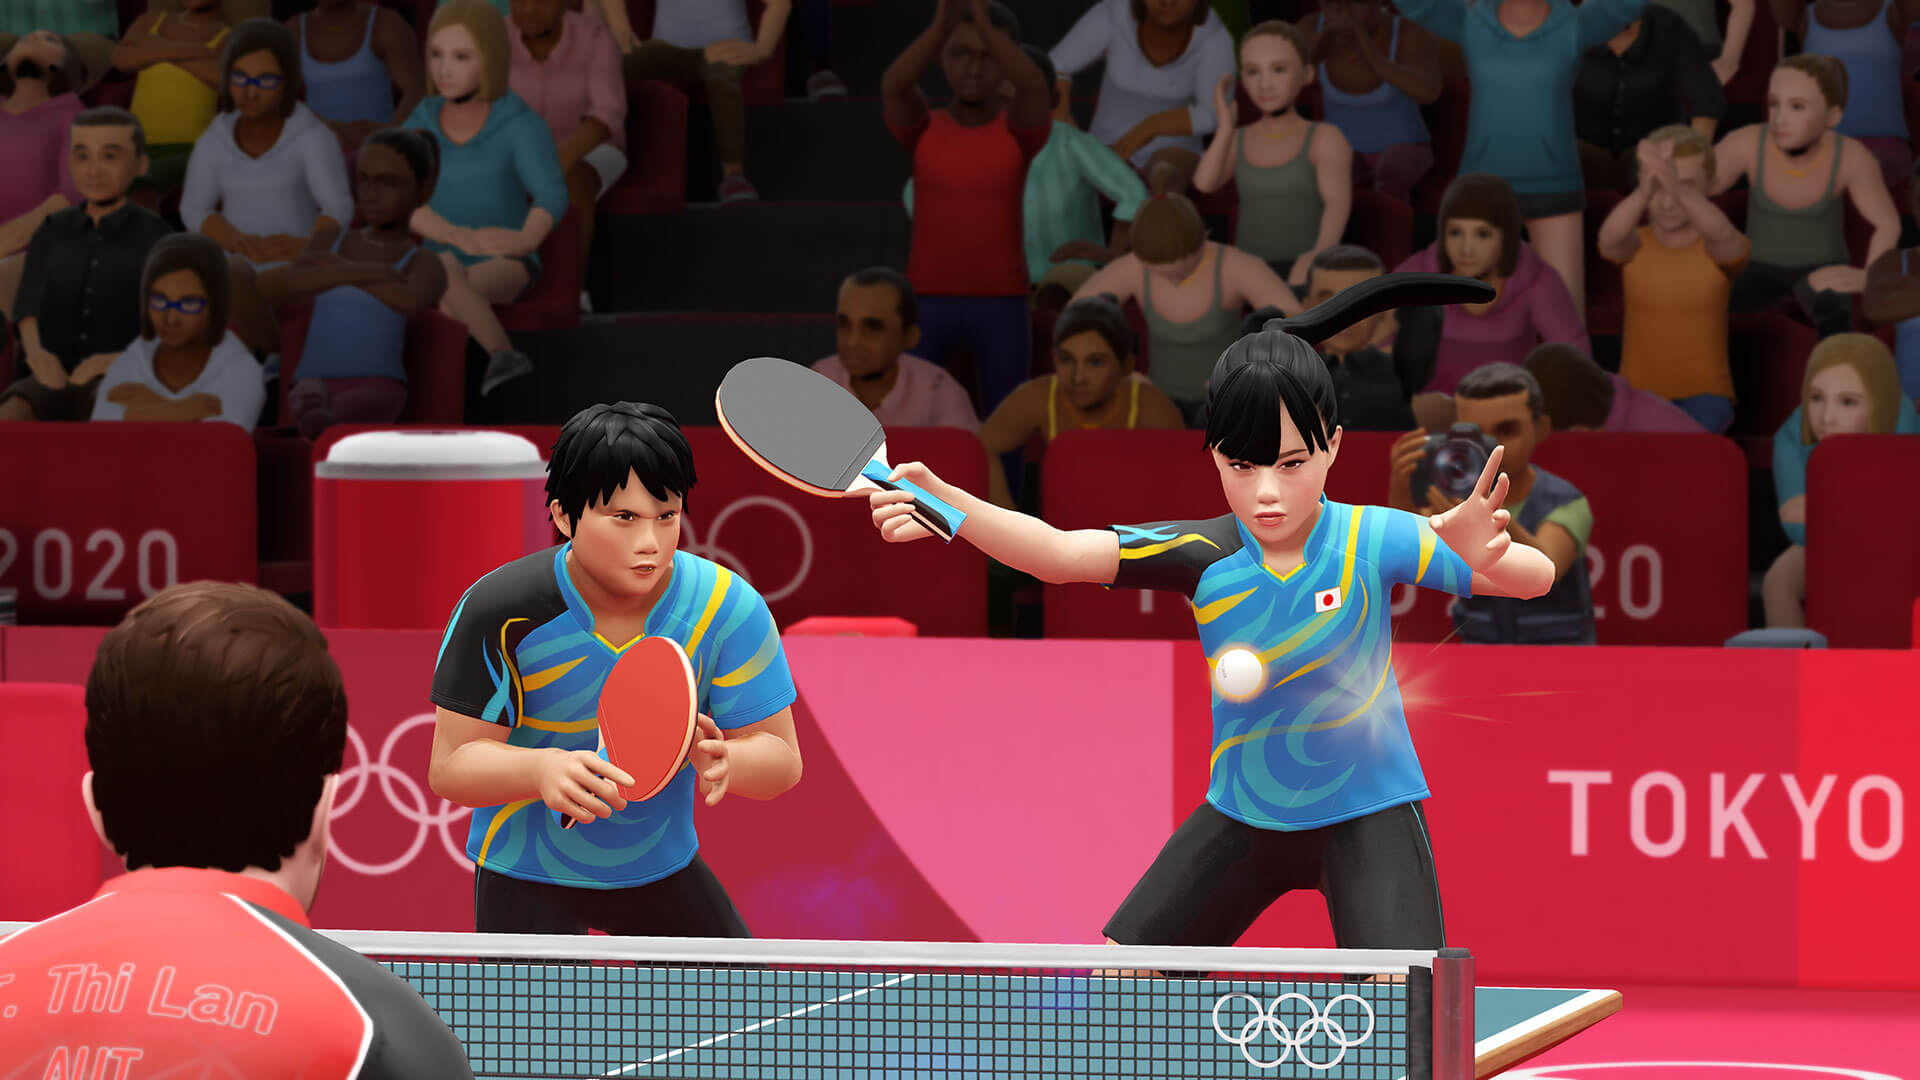 Olympic Games Tokyo 2020 - The Official Video Game - screenshot 4